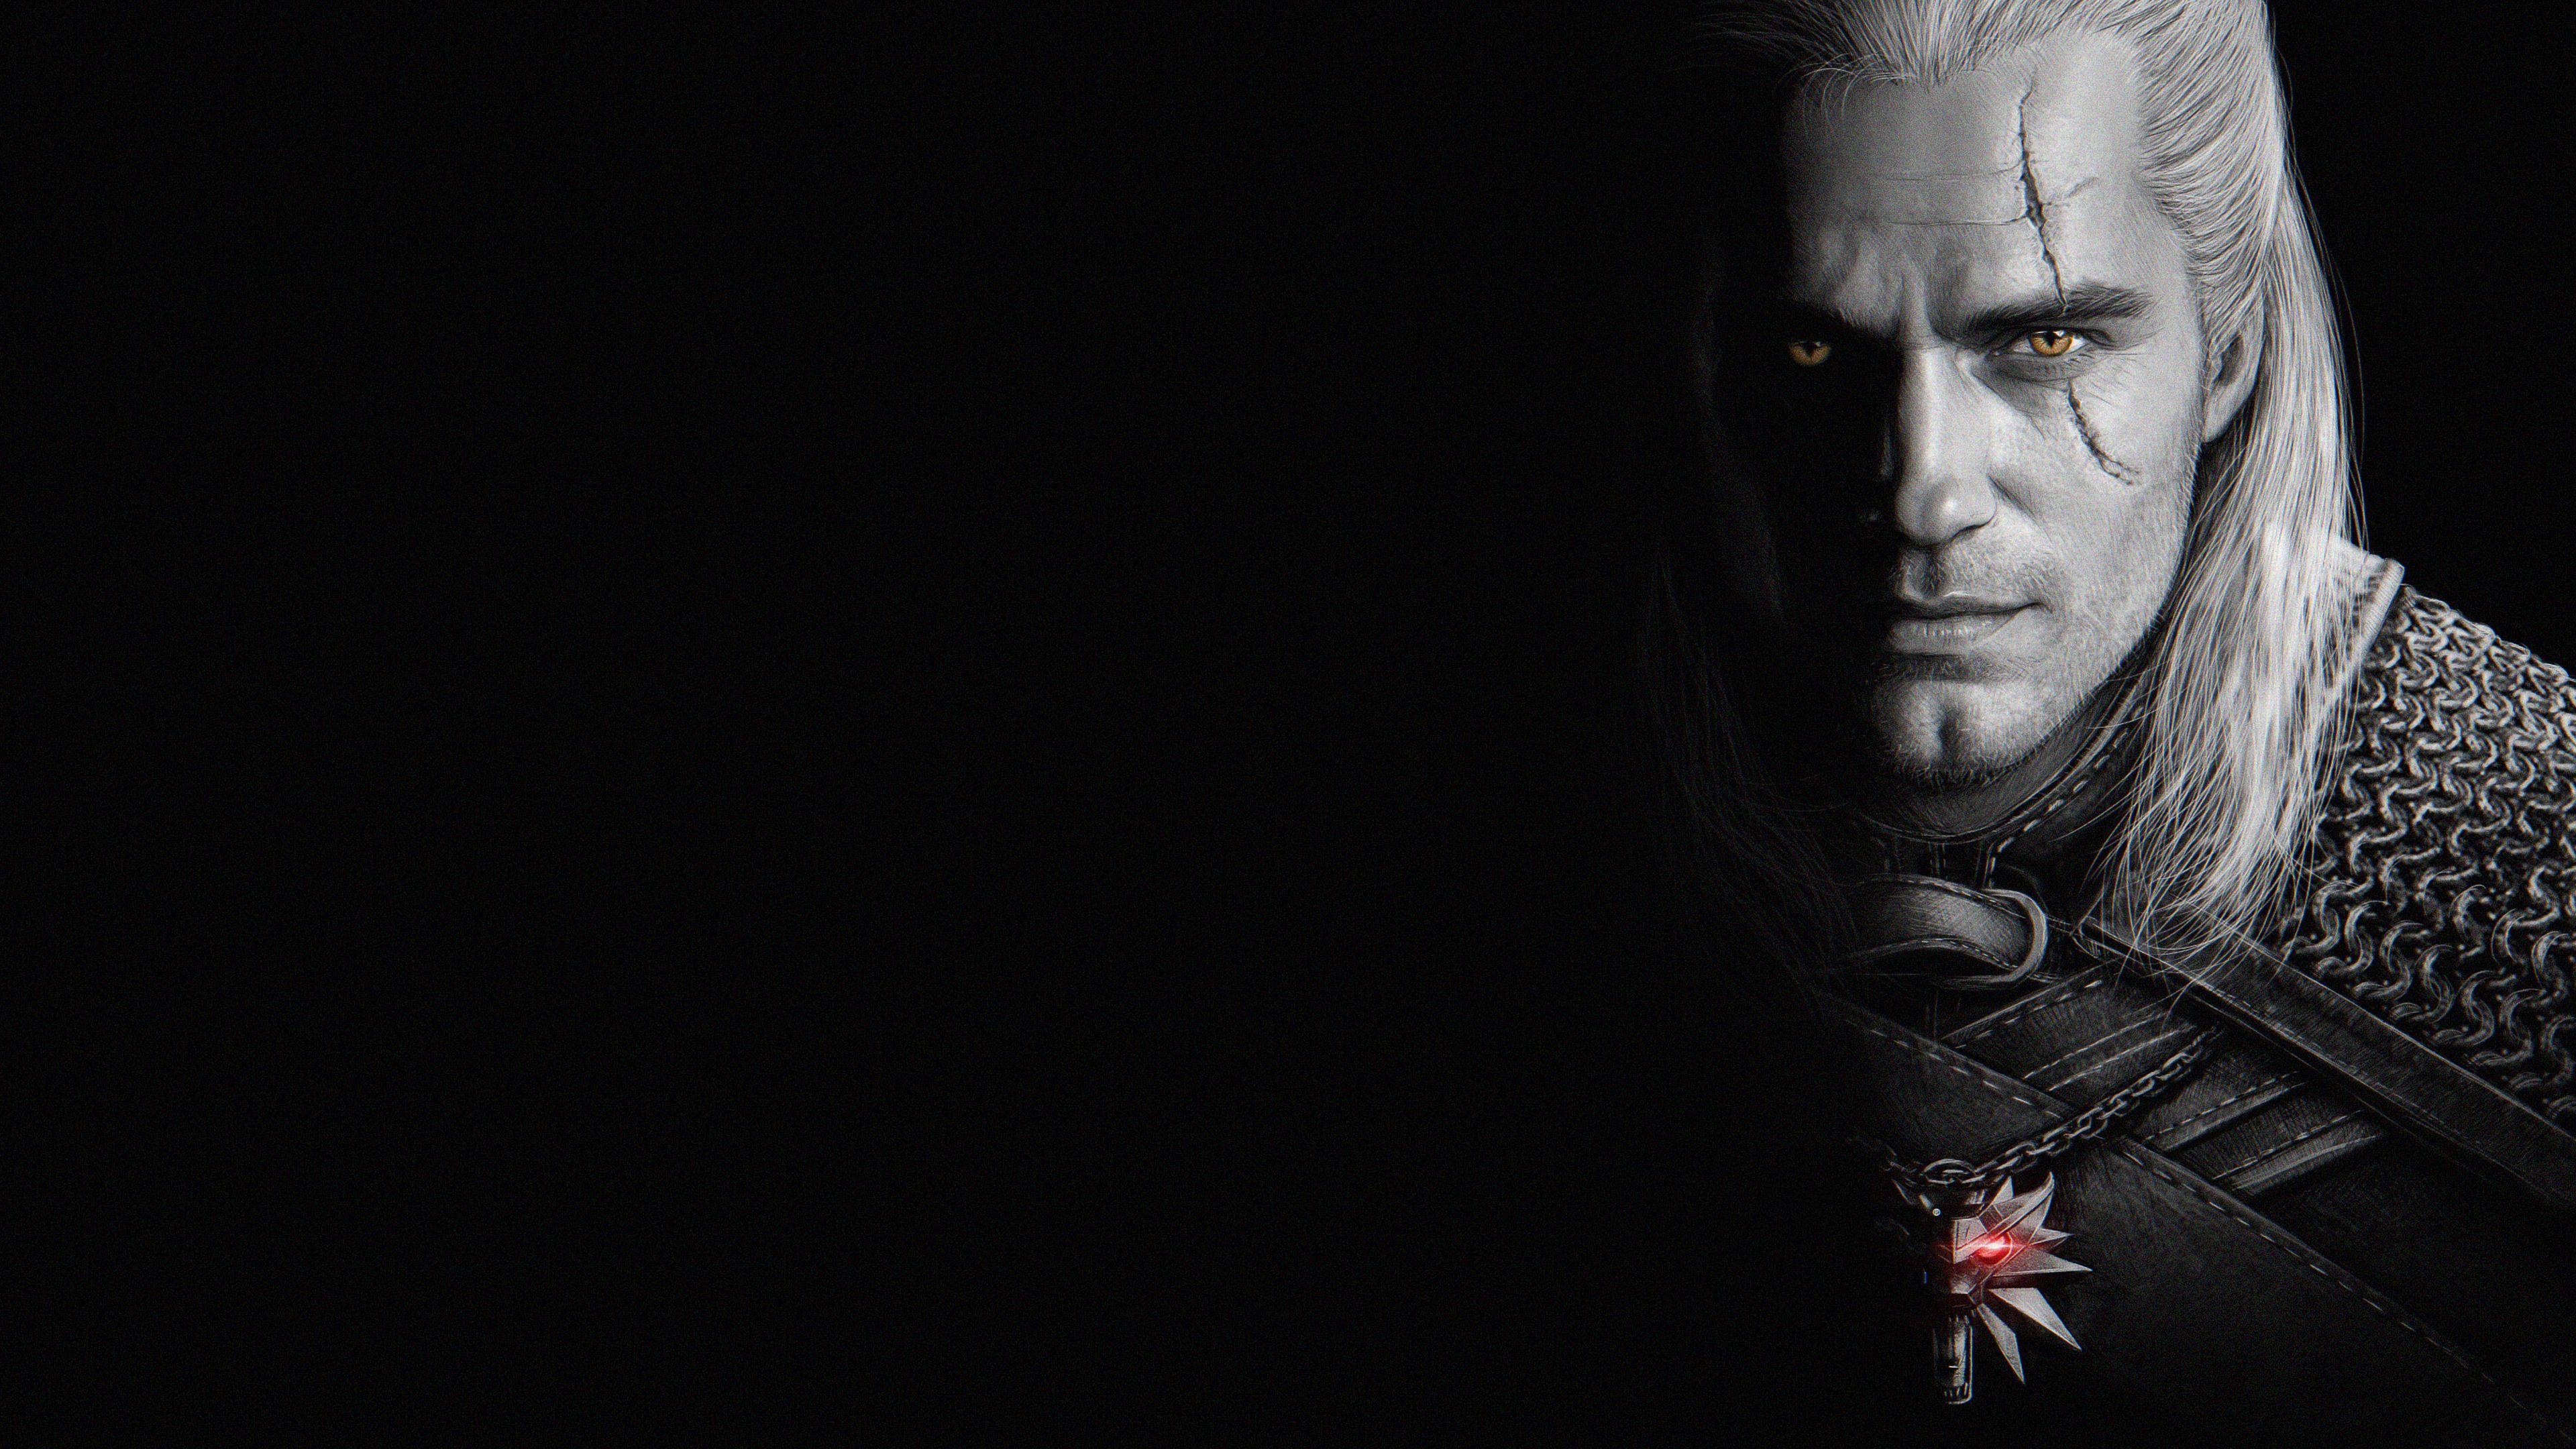 The Witcher Henry Cavill Black White Yennefer wallpaper witcher 4k, Yennefer In Witcher wallpaper HD 4k, Yennef. Witcher wallpaper, Papel de parede pc, Imagens hd